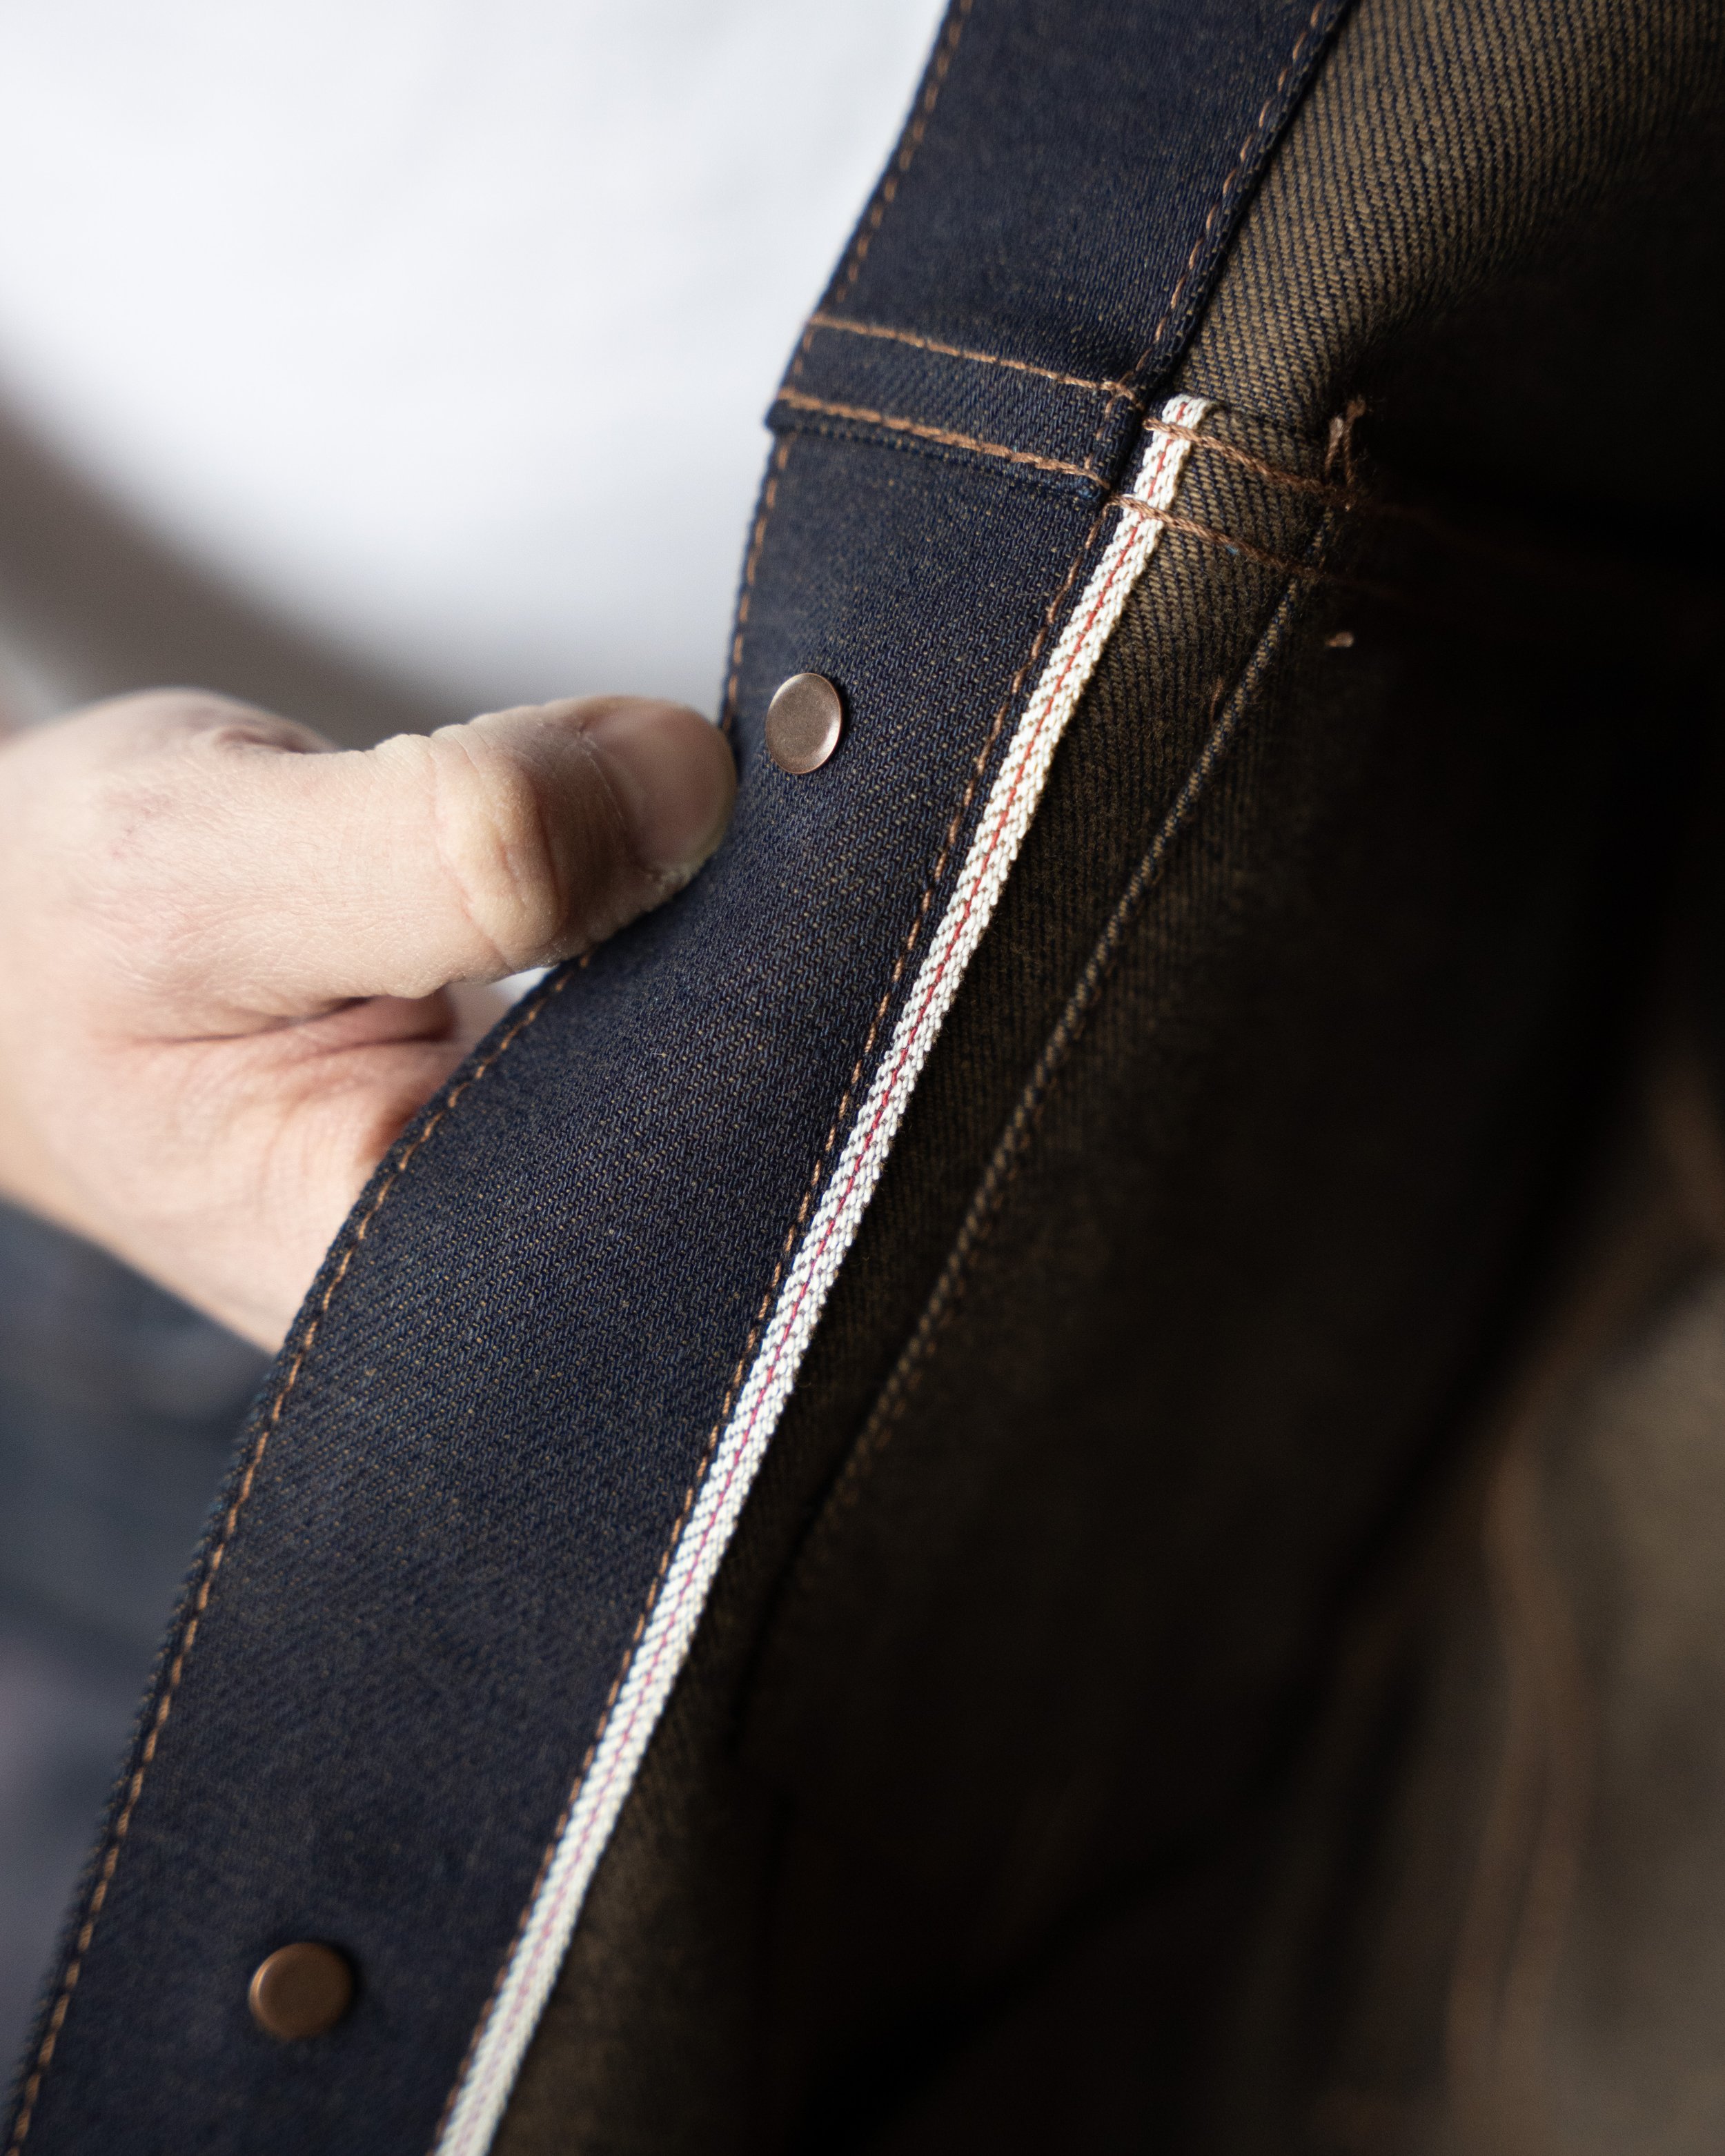 Introducing the Double Dirty Fade Selvedge: A 